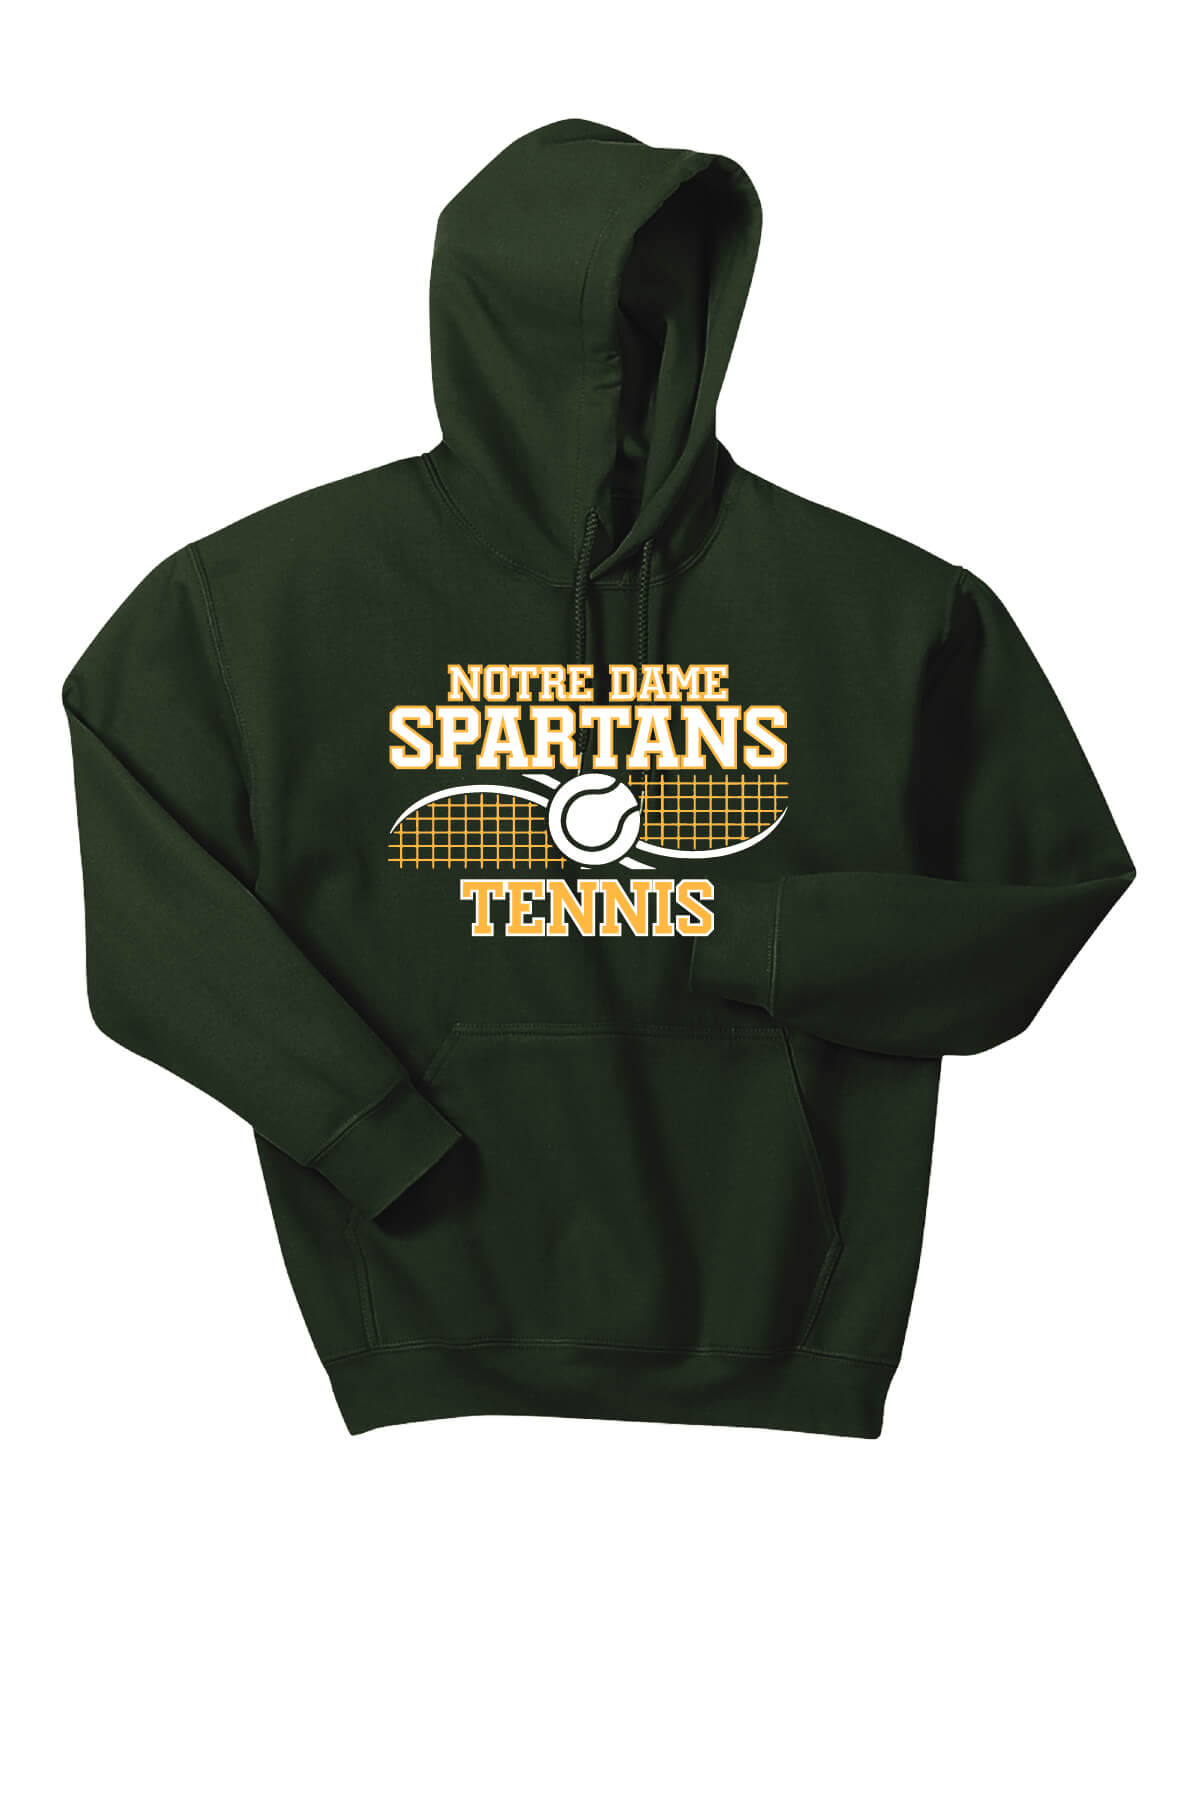 Notre Dame Spartans Hoodie green